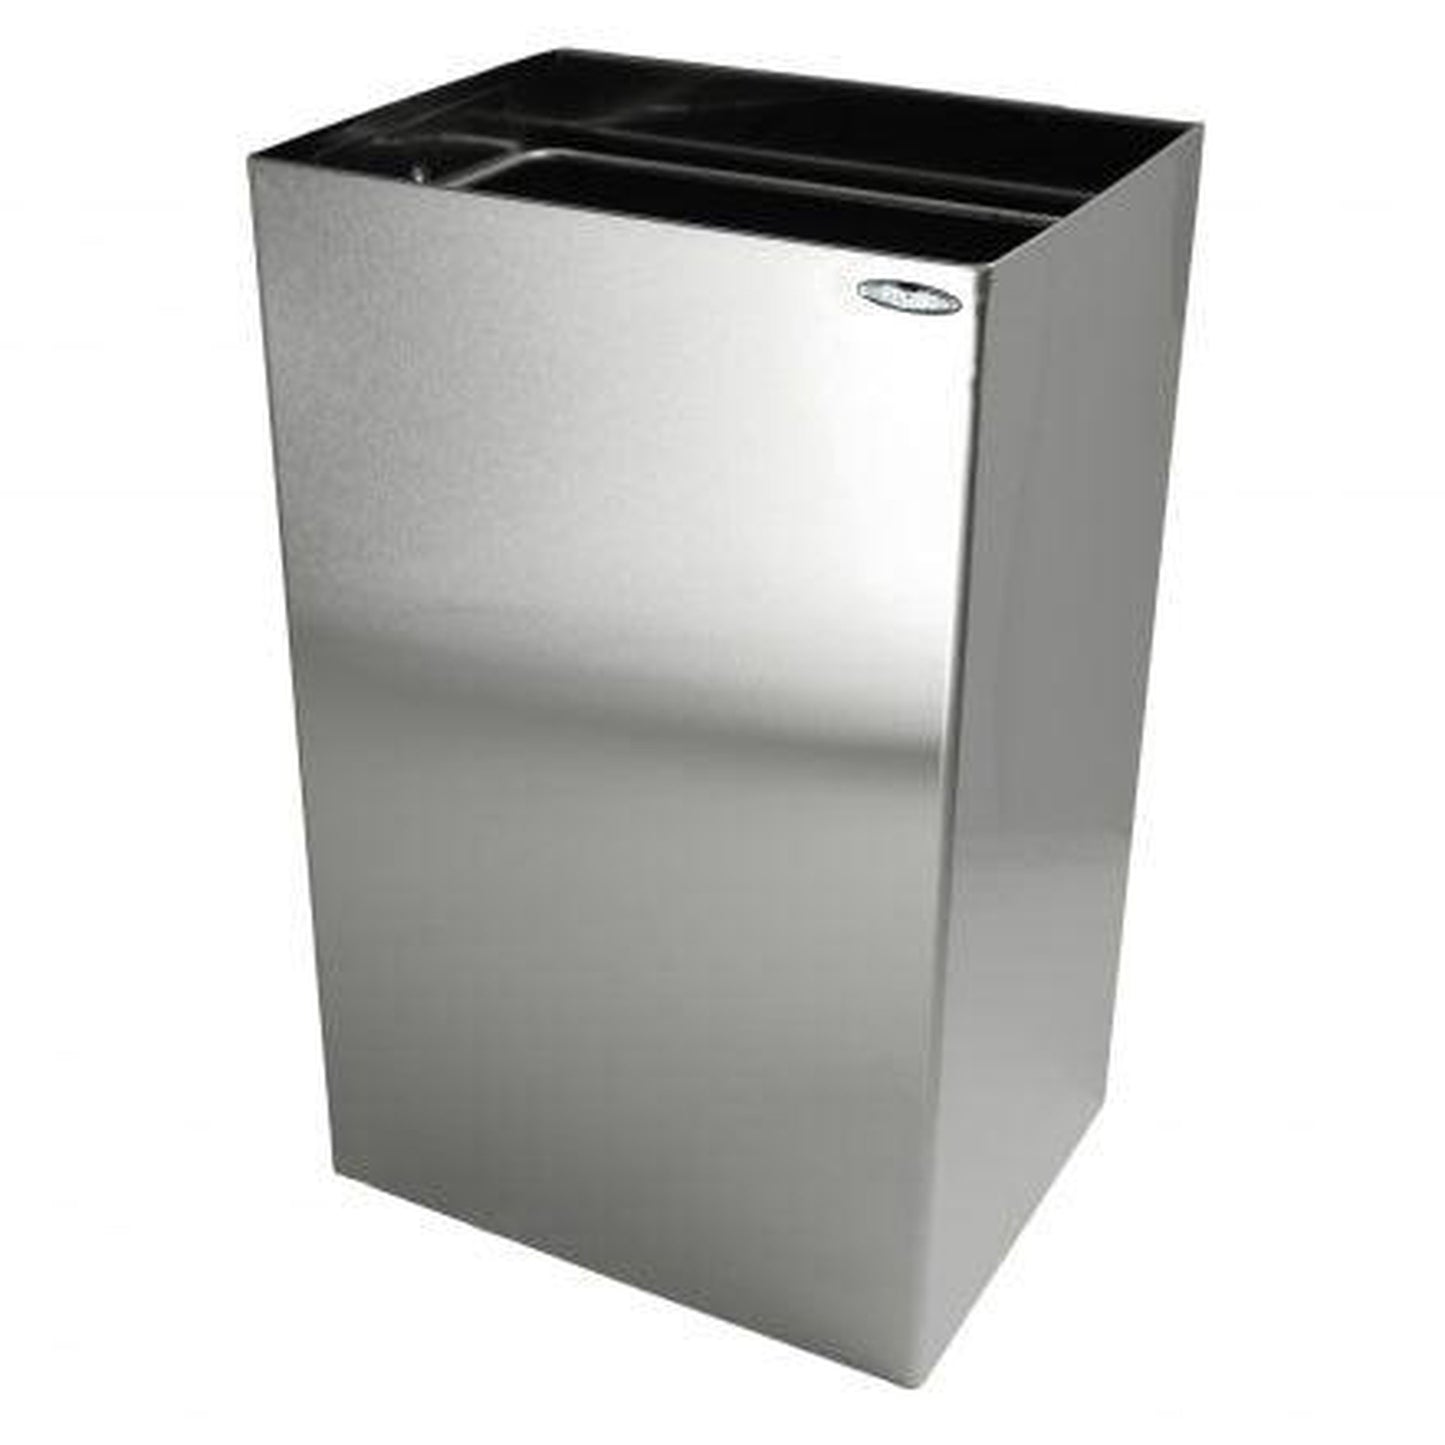 Frost 15.25 x 11.5 x 24.25 Stainless Steel Satin Waste Receptacles